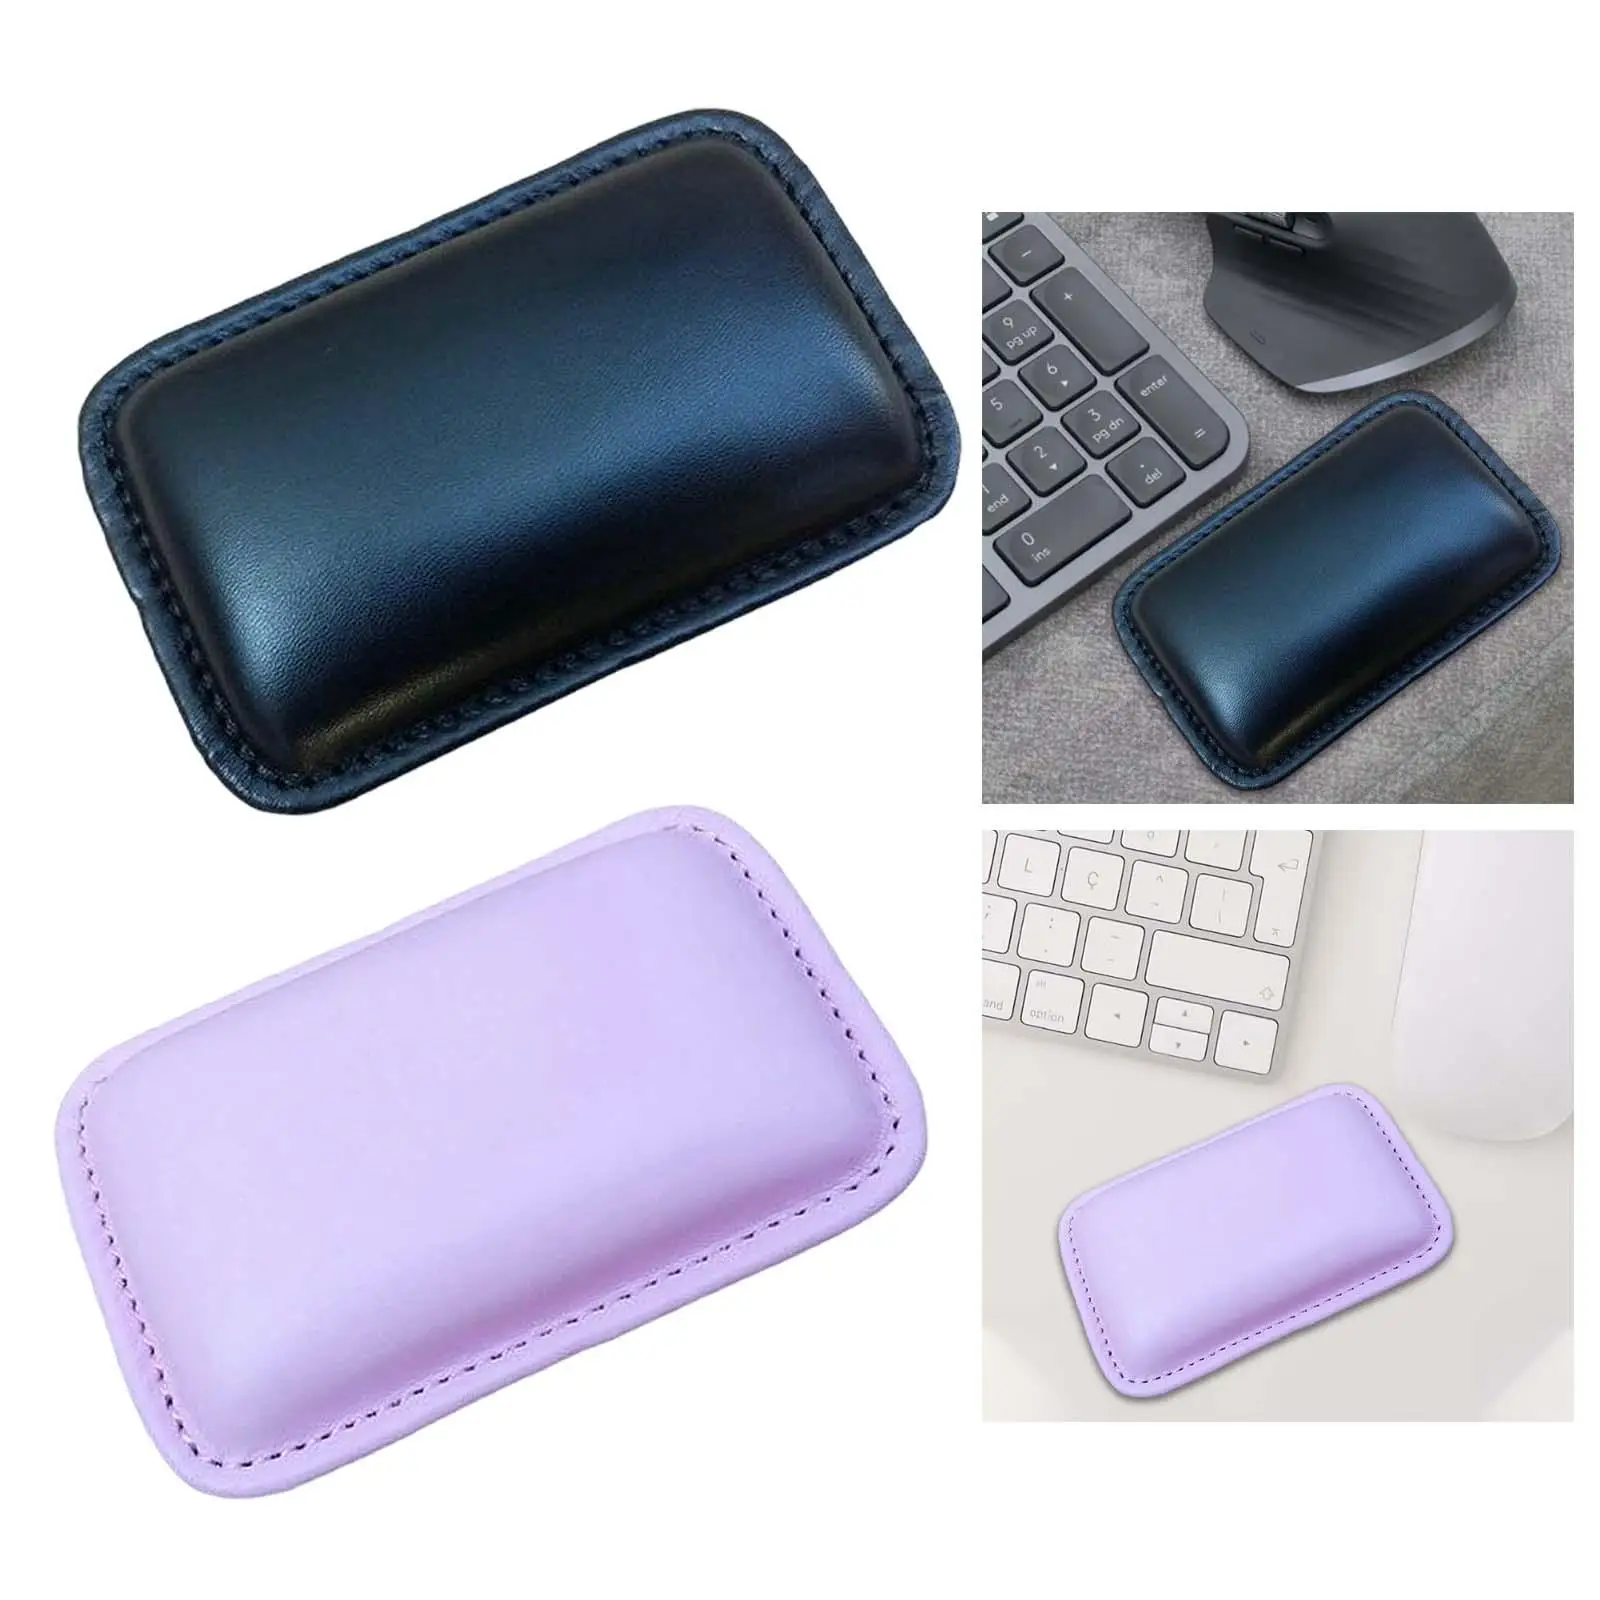 PU Leather Mouse Wrist Rest Waterproof Non Slip Base Wrist Pain Ease Reduce Wrist Fatigue Pain Hand Rest Cushion for Computer